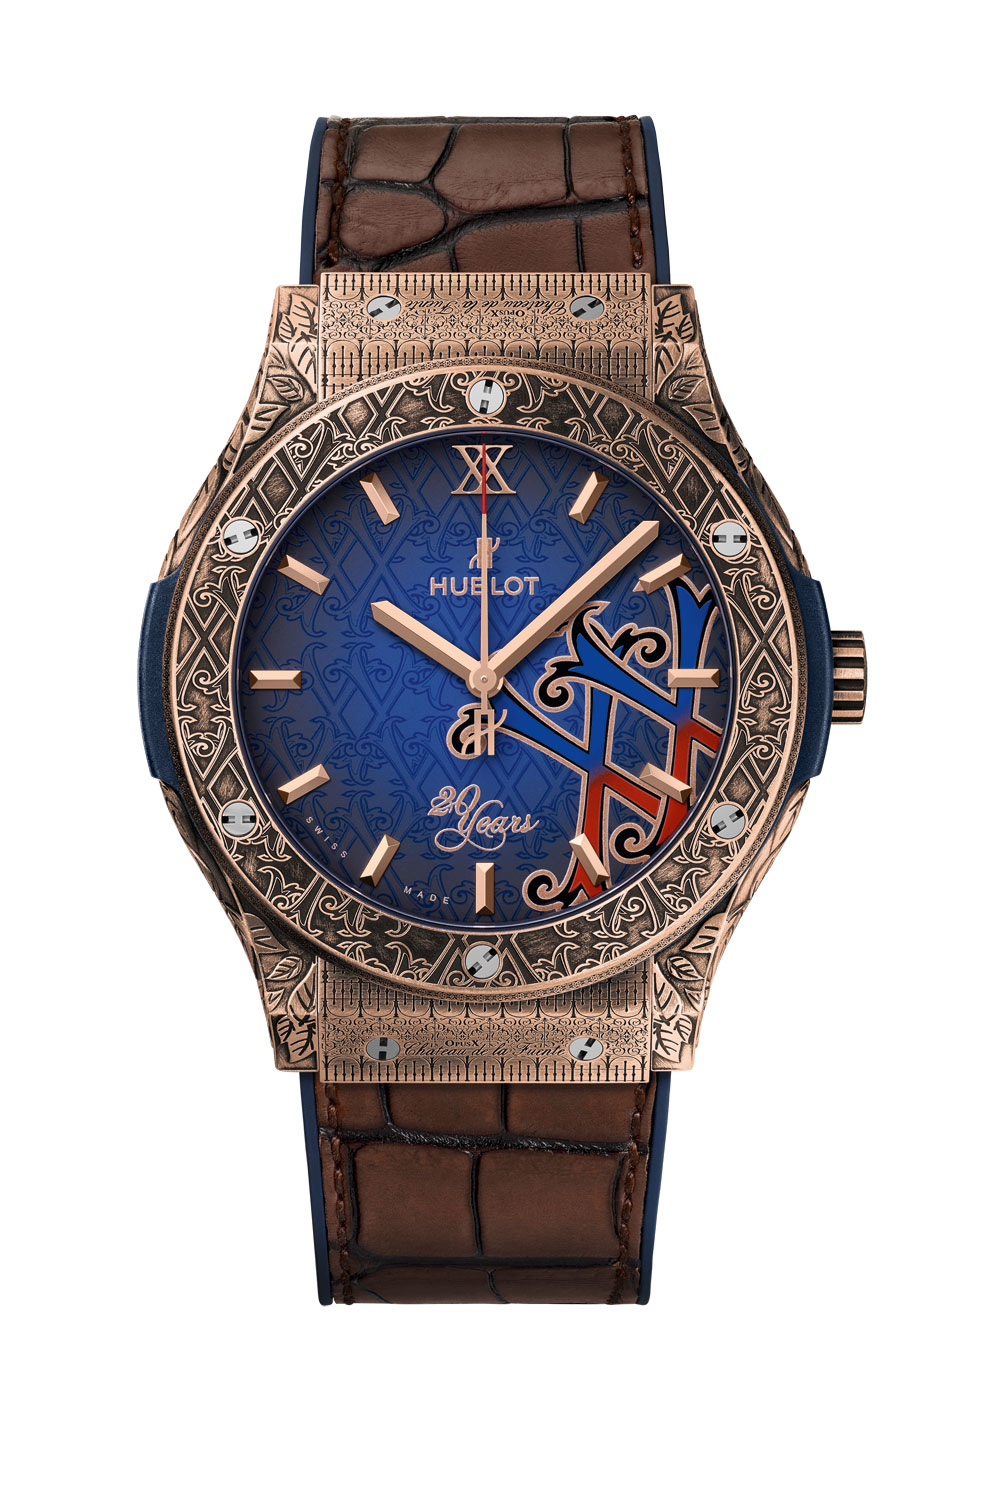 Hublot Classic Fusion Fuente 20th Anniversary - King gold - front